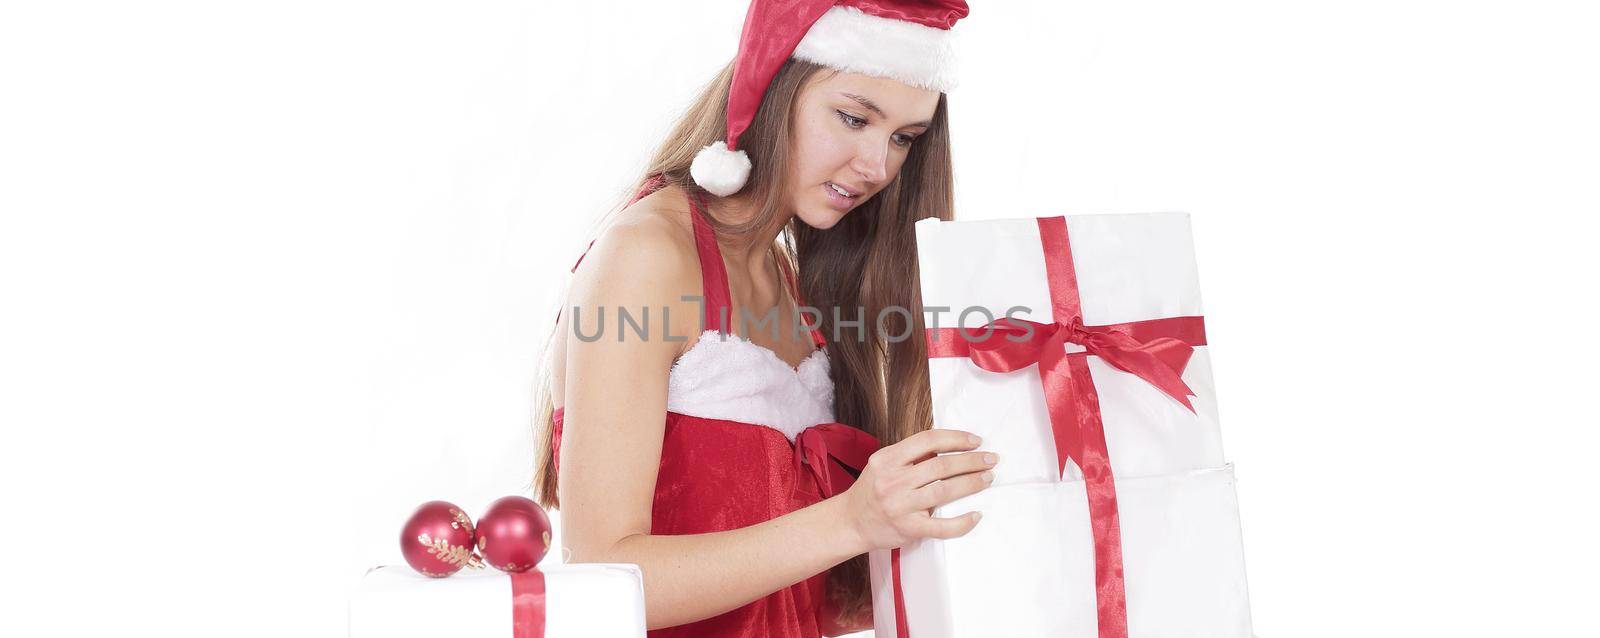 beautiful young woman in a Christmas costume looking at a box of Christmas gifts. photo with copy space.